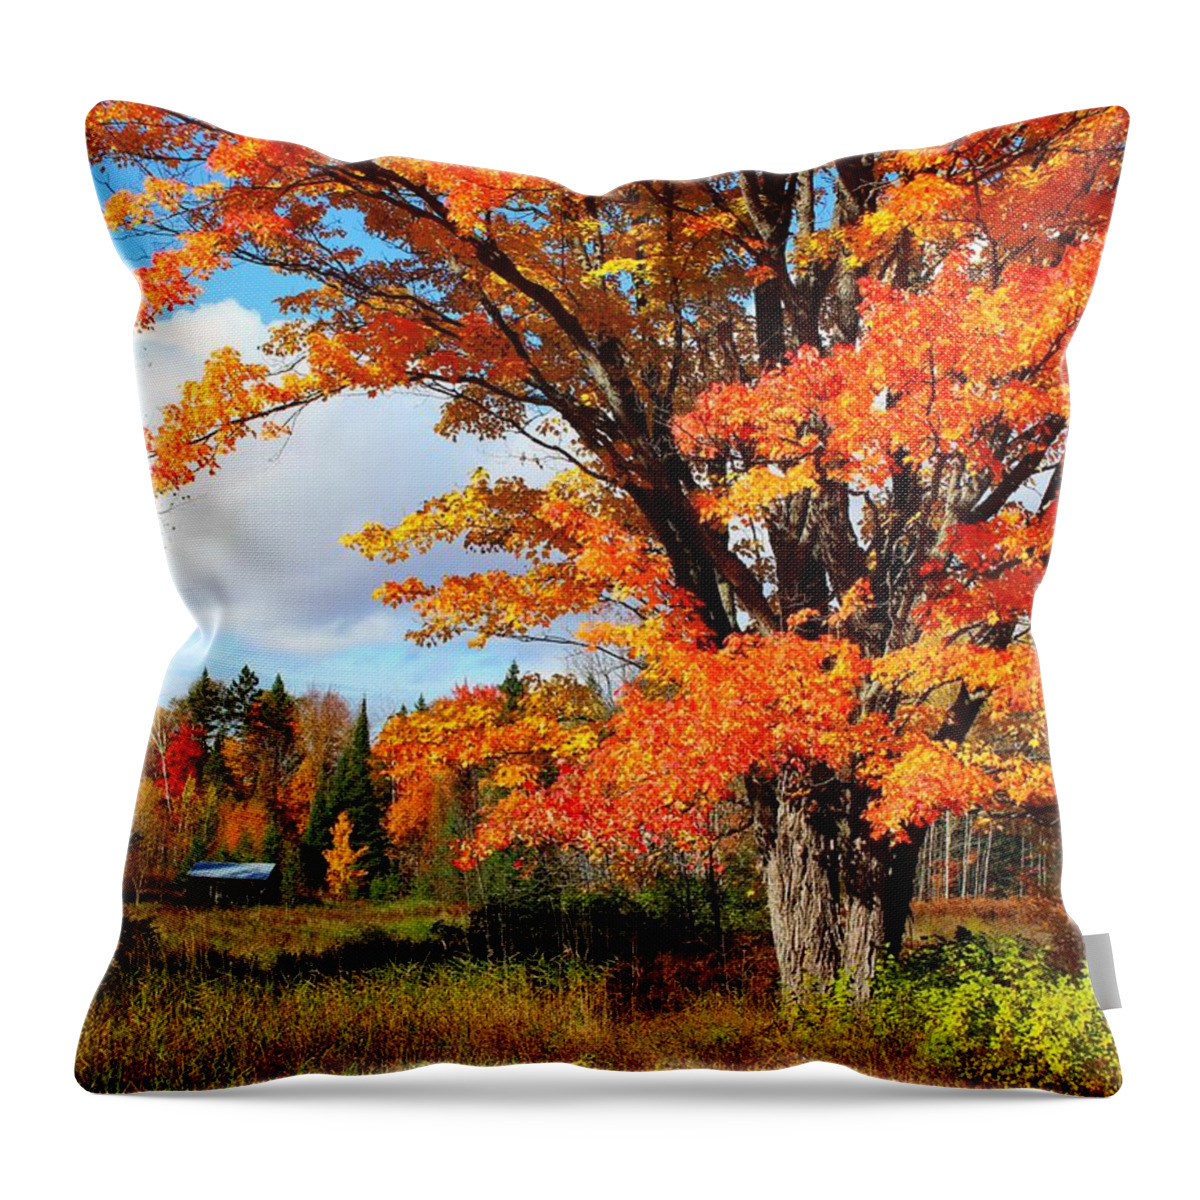 Fall Throw Pillow featuring the photograph Autumn Glory by Gigi Dequanne